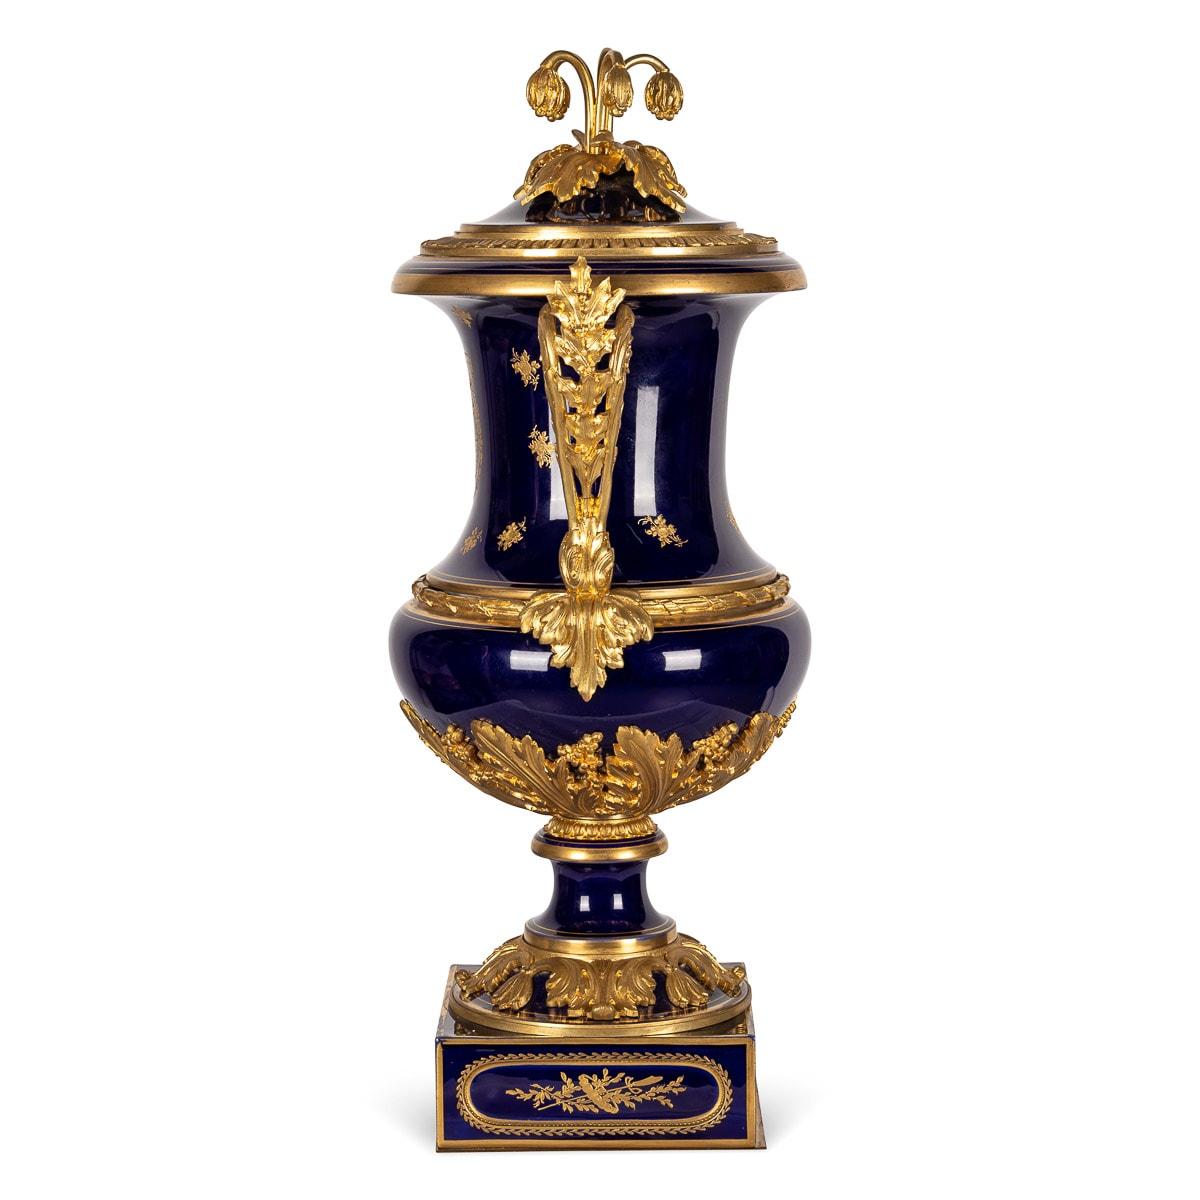 Antique mid-19th Century French fine Serves vase, exquisitely covered in rich cobalt blue glaze over porcelain ground. The base applied with large cast ormolu acanthus leaves, elabarate scroll side handles and decorative finial cast as snowdrop